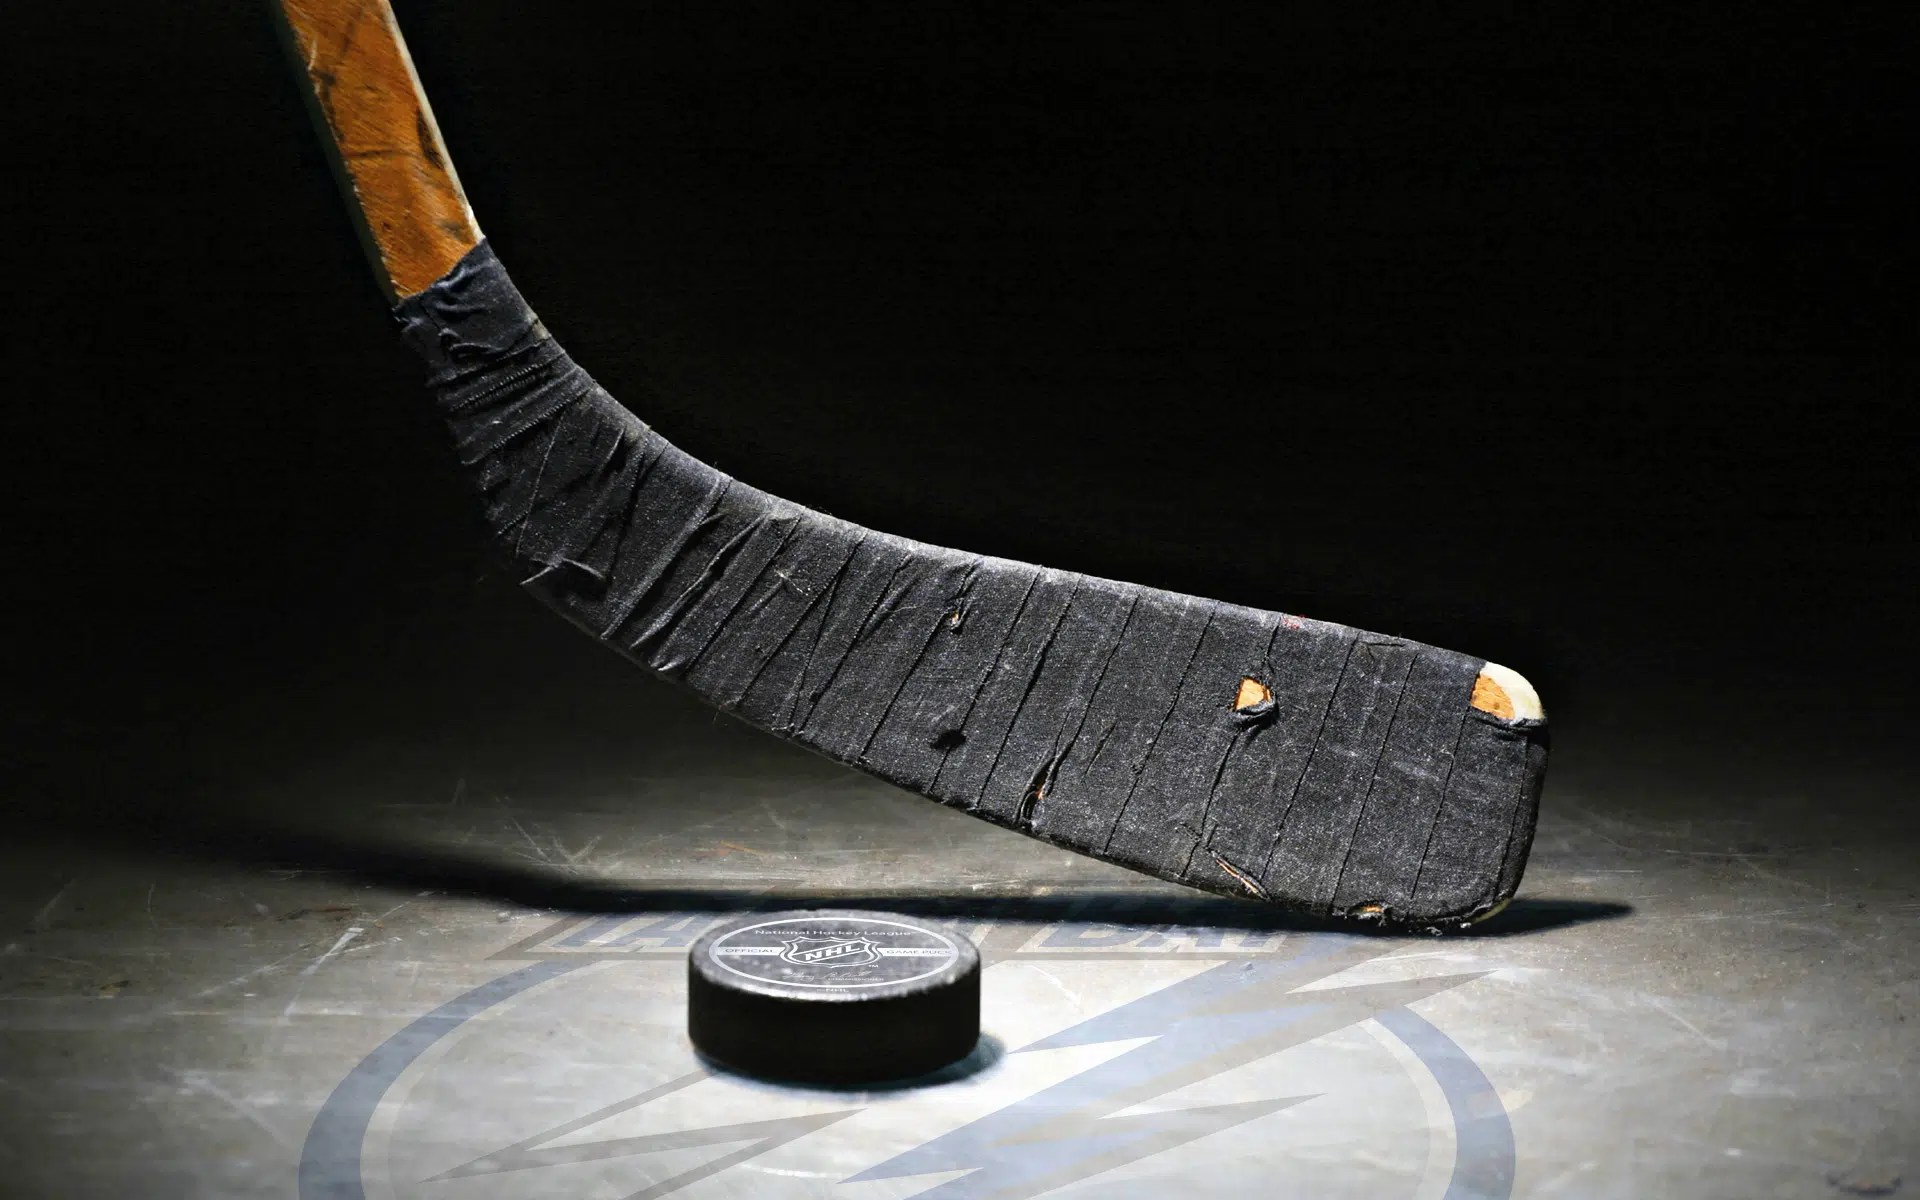 Local Hockey Results: March 12-13